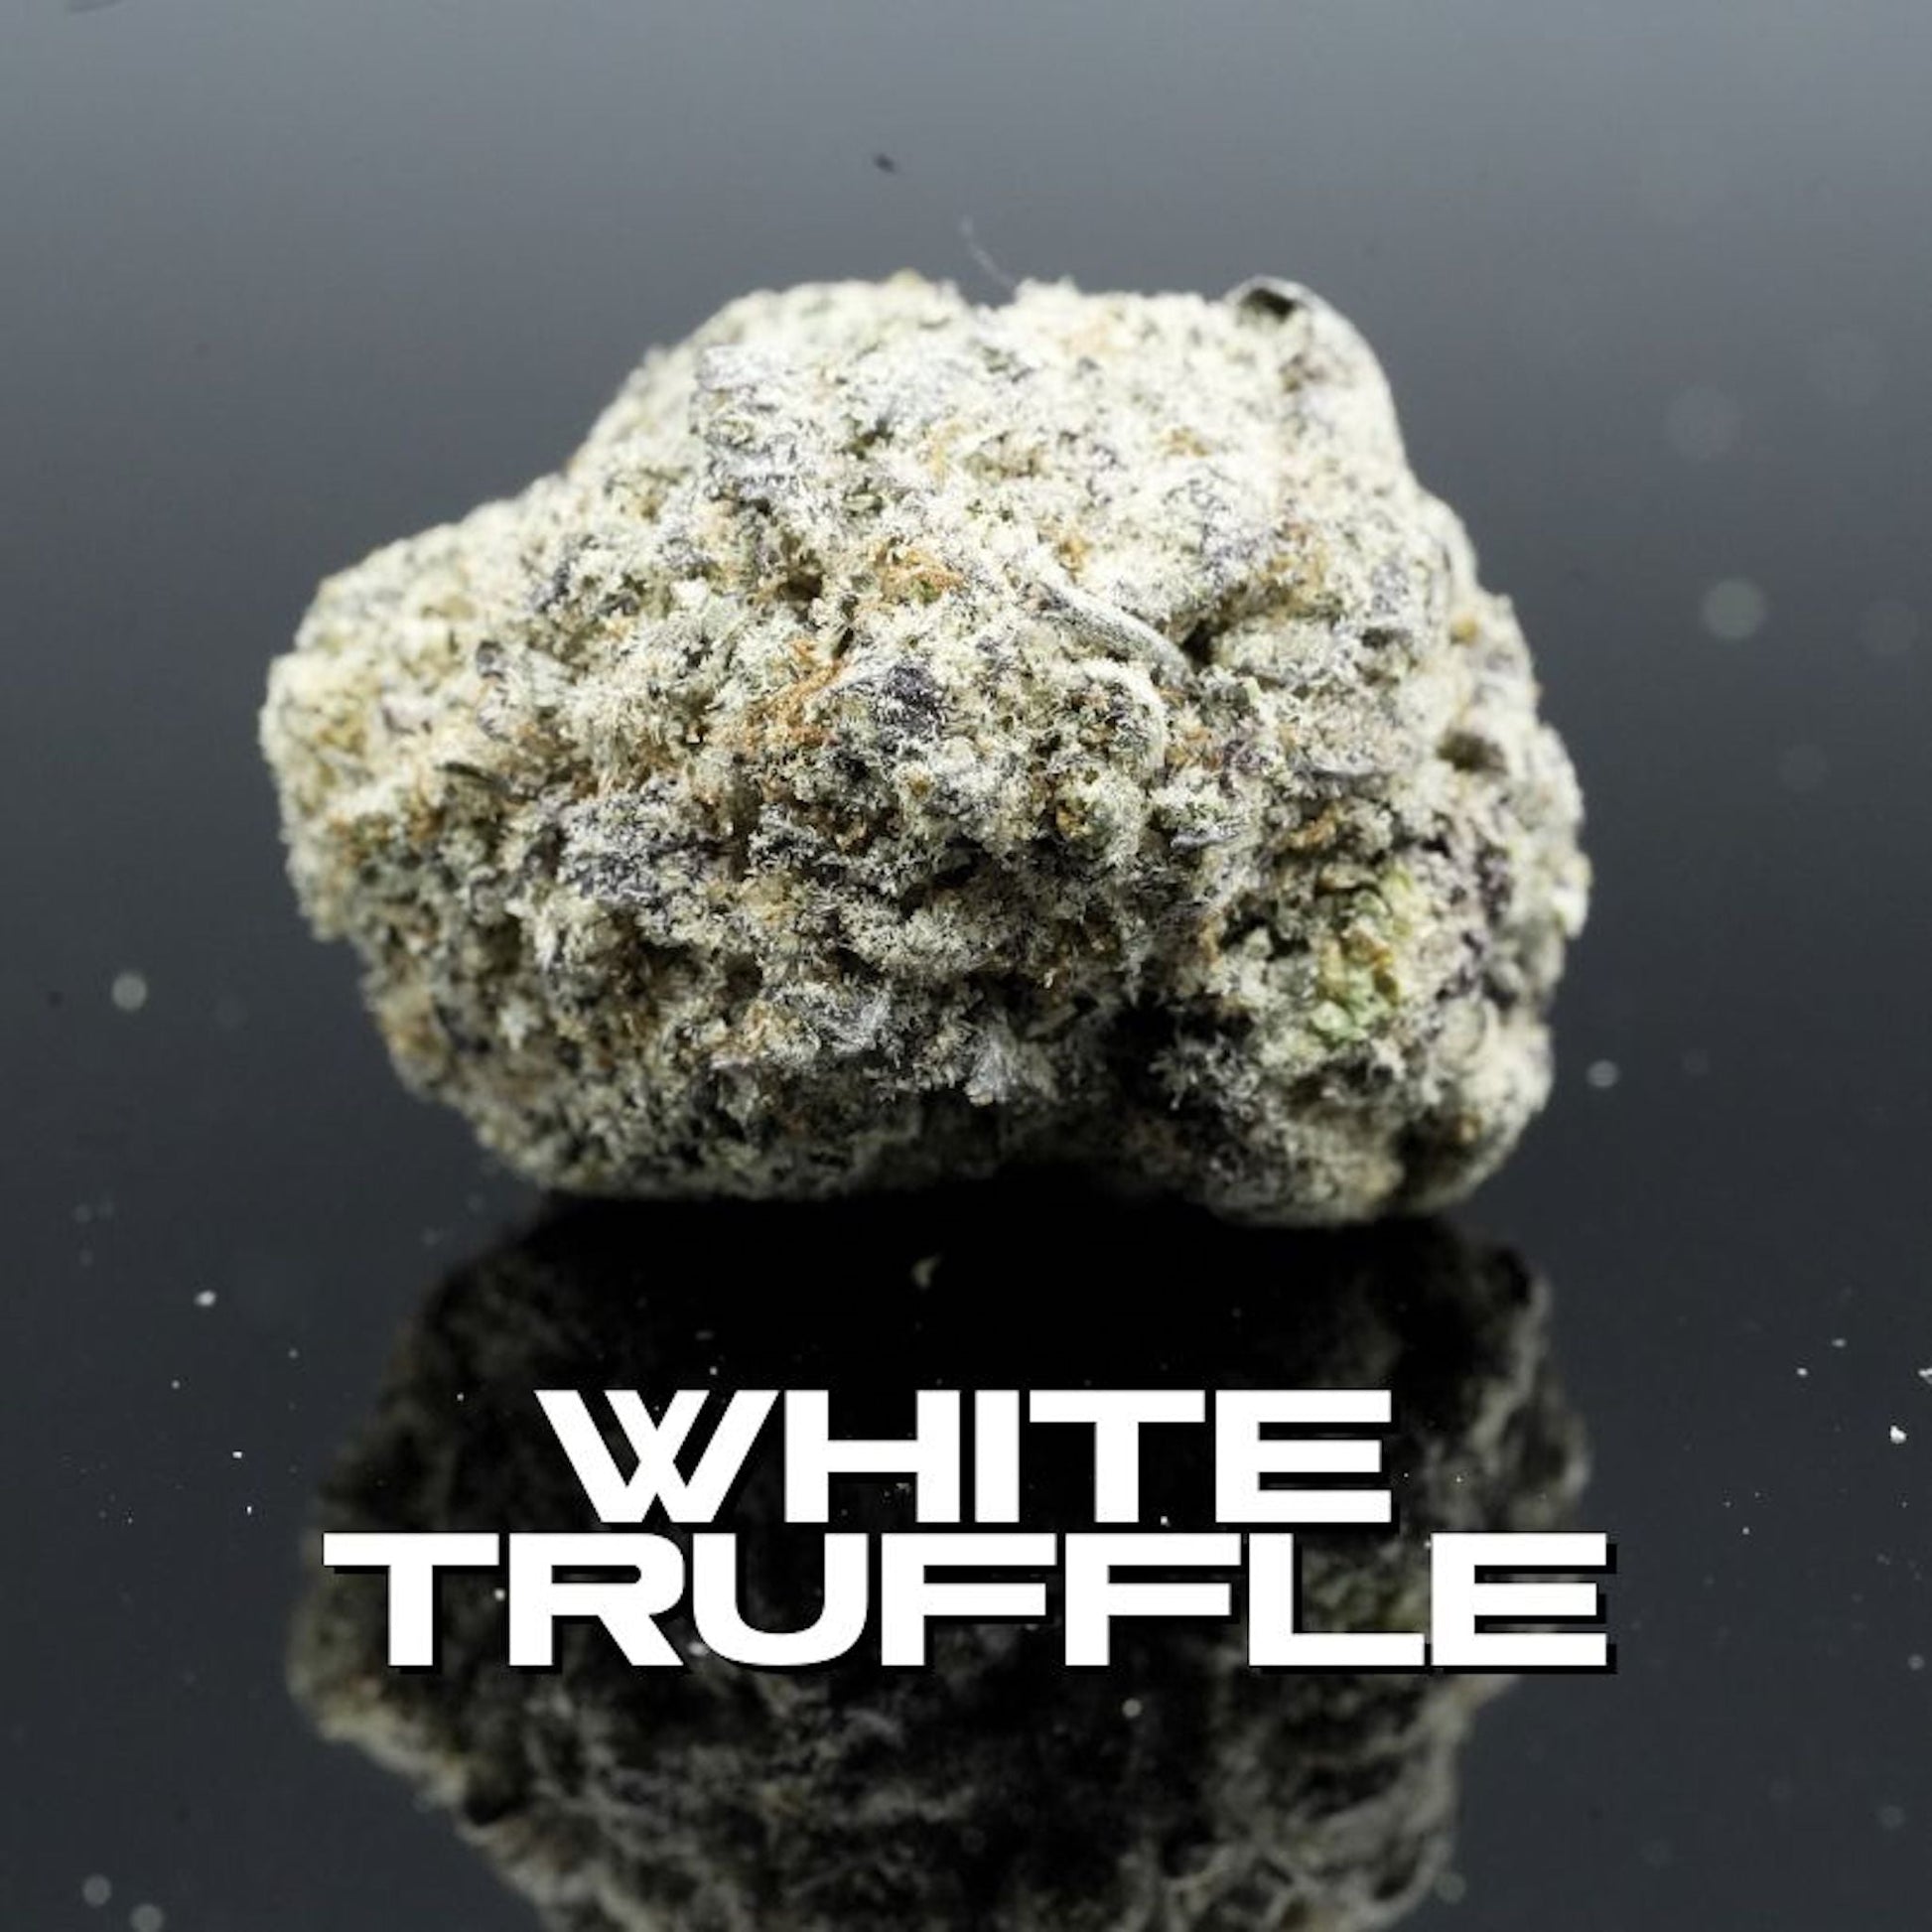 Puro Exotic Line THC-A Flower - 3.5g